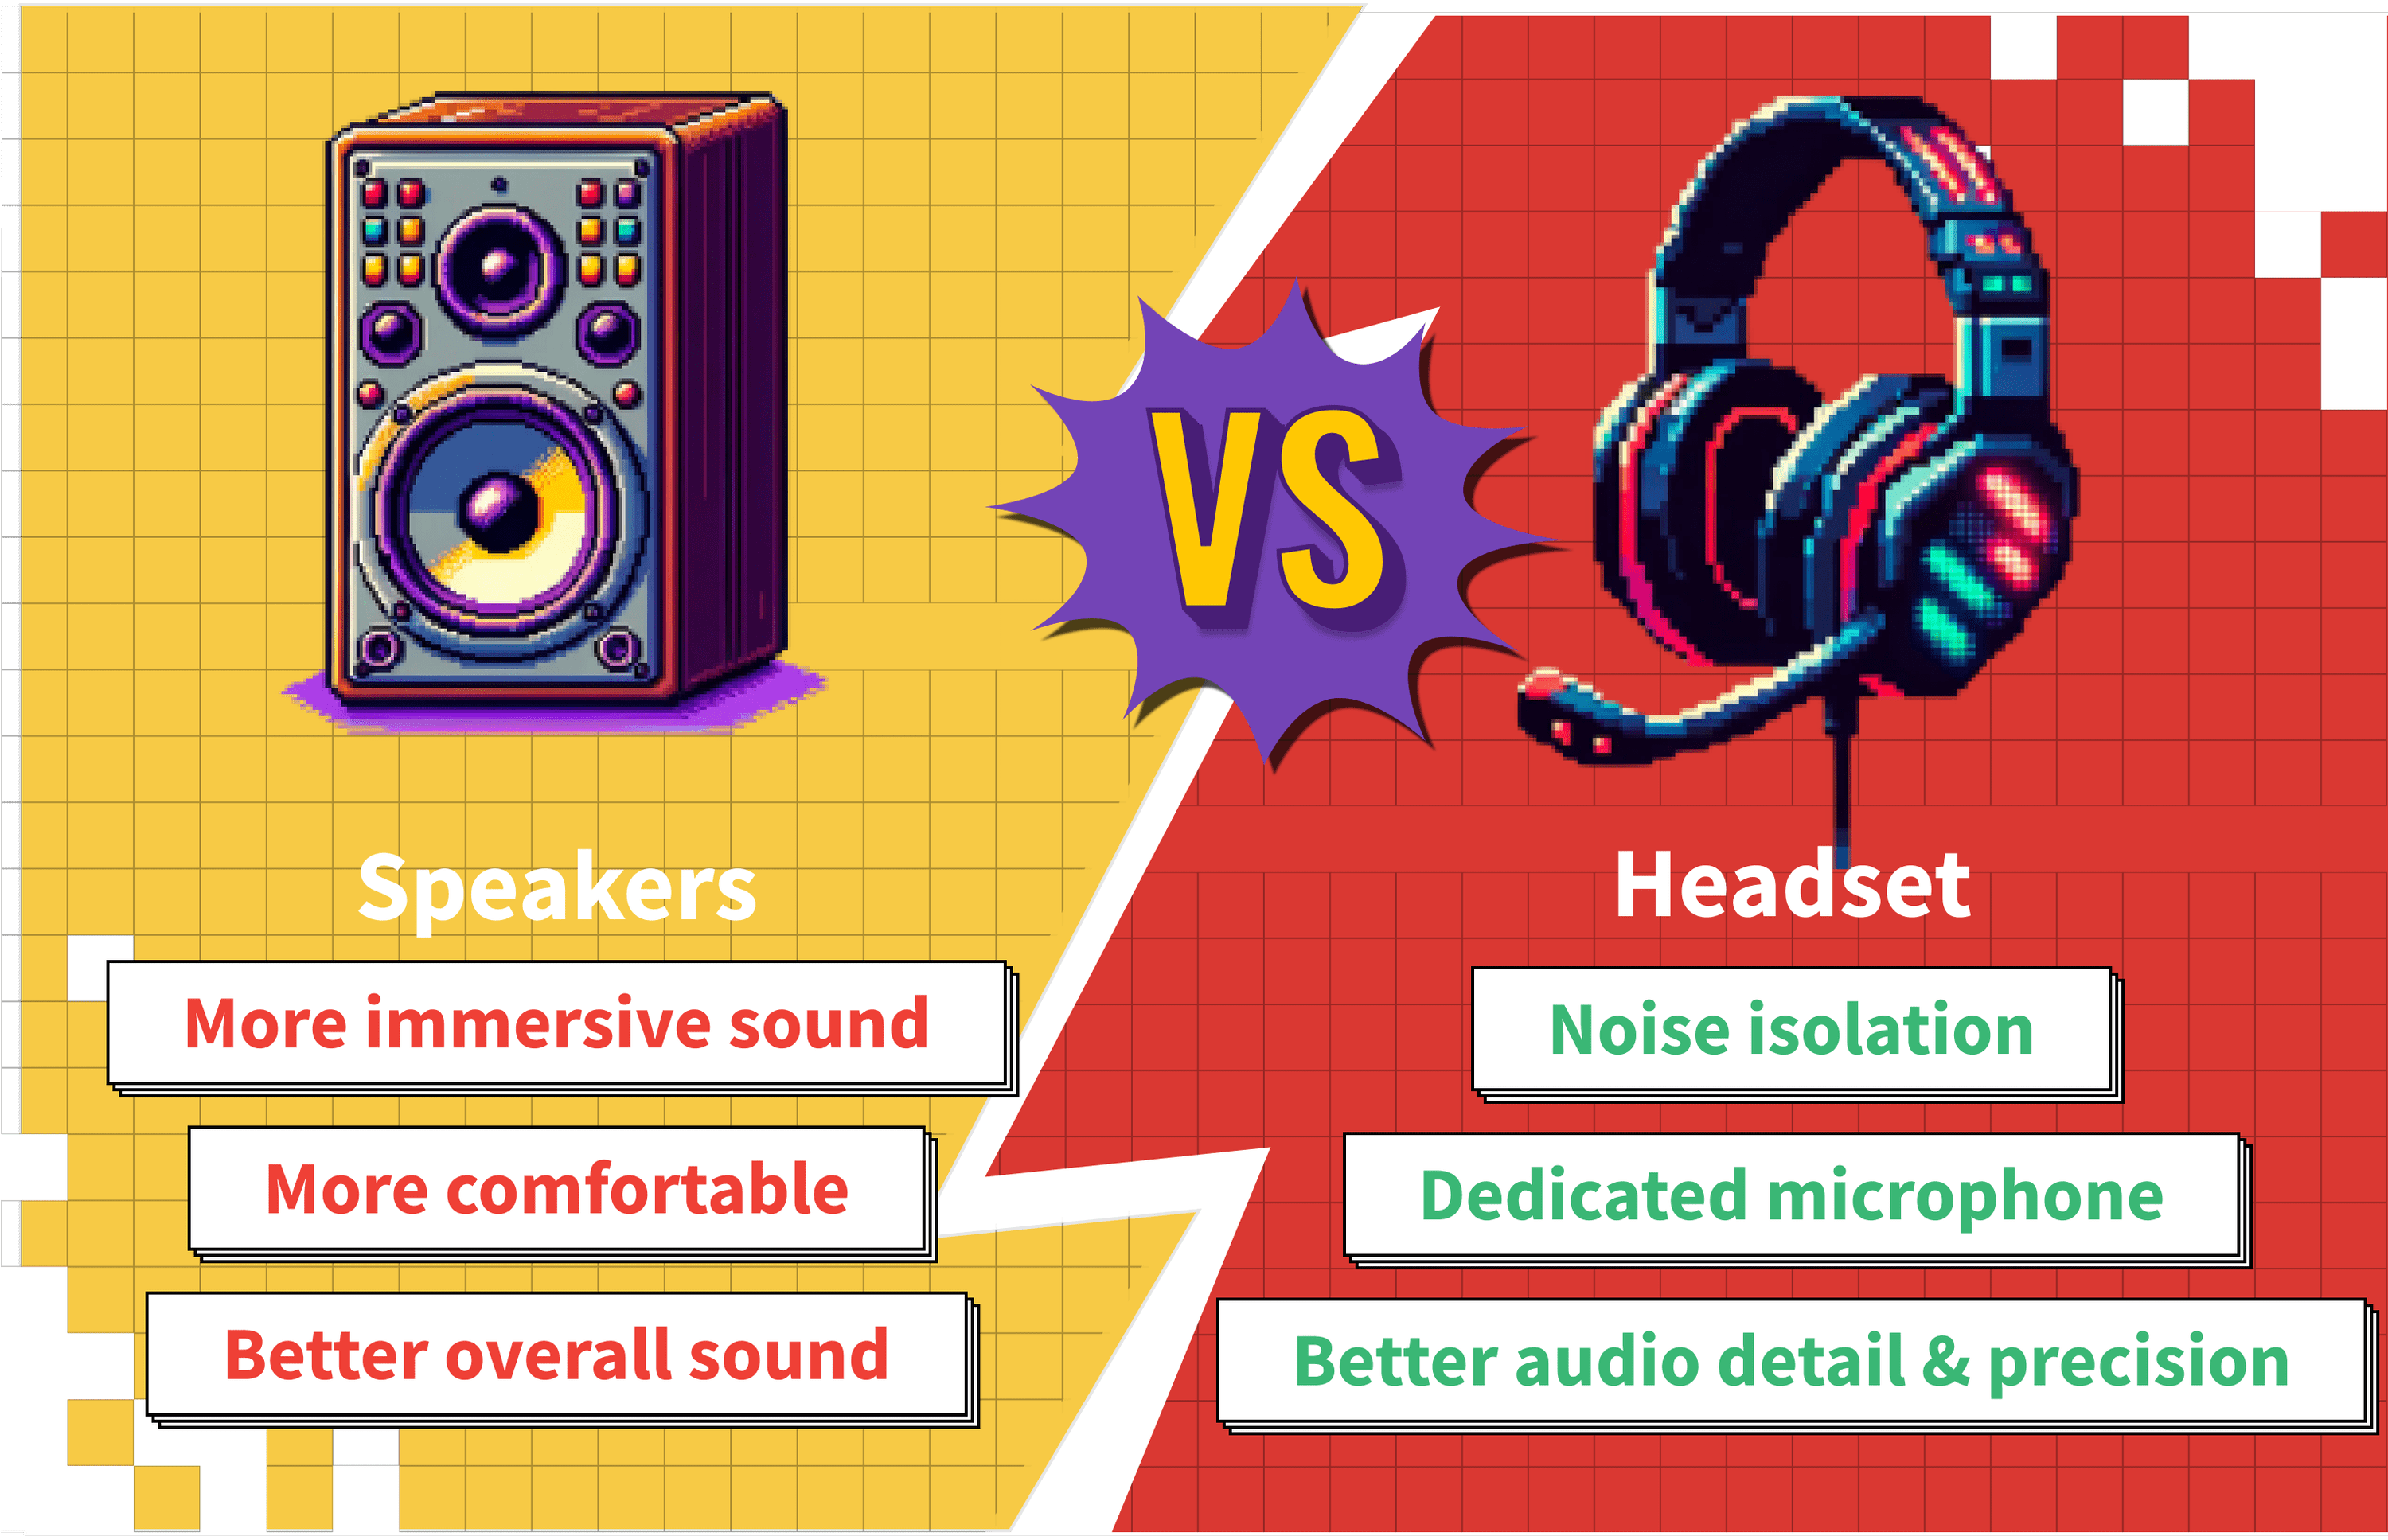 Using a Headset vs Speakers for Gaming